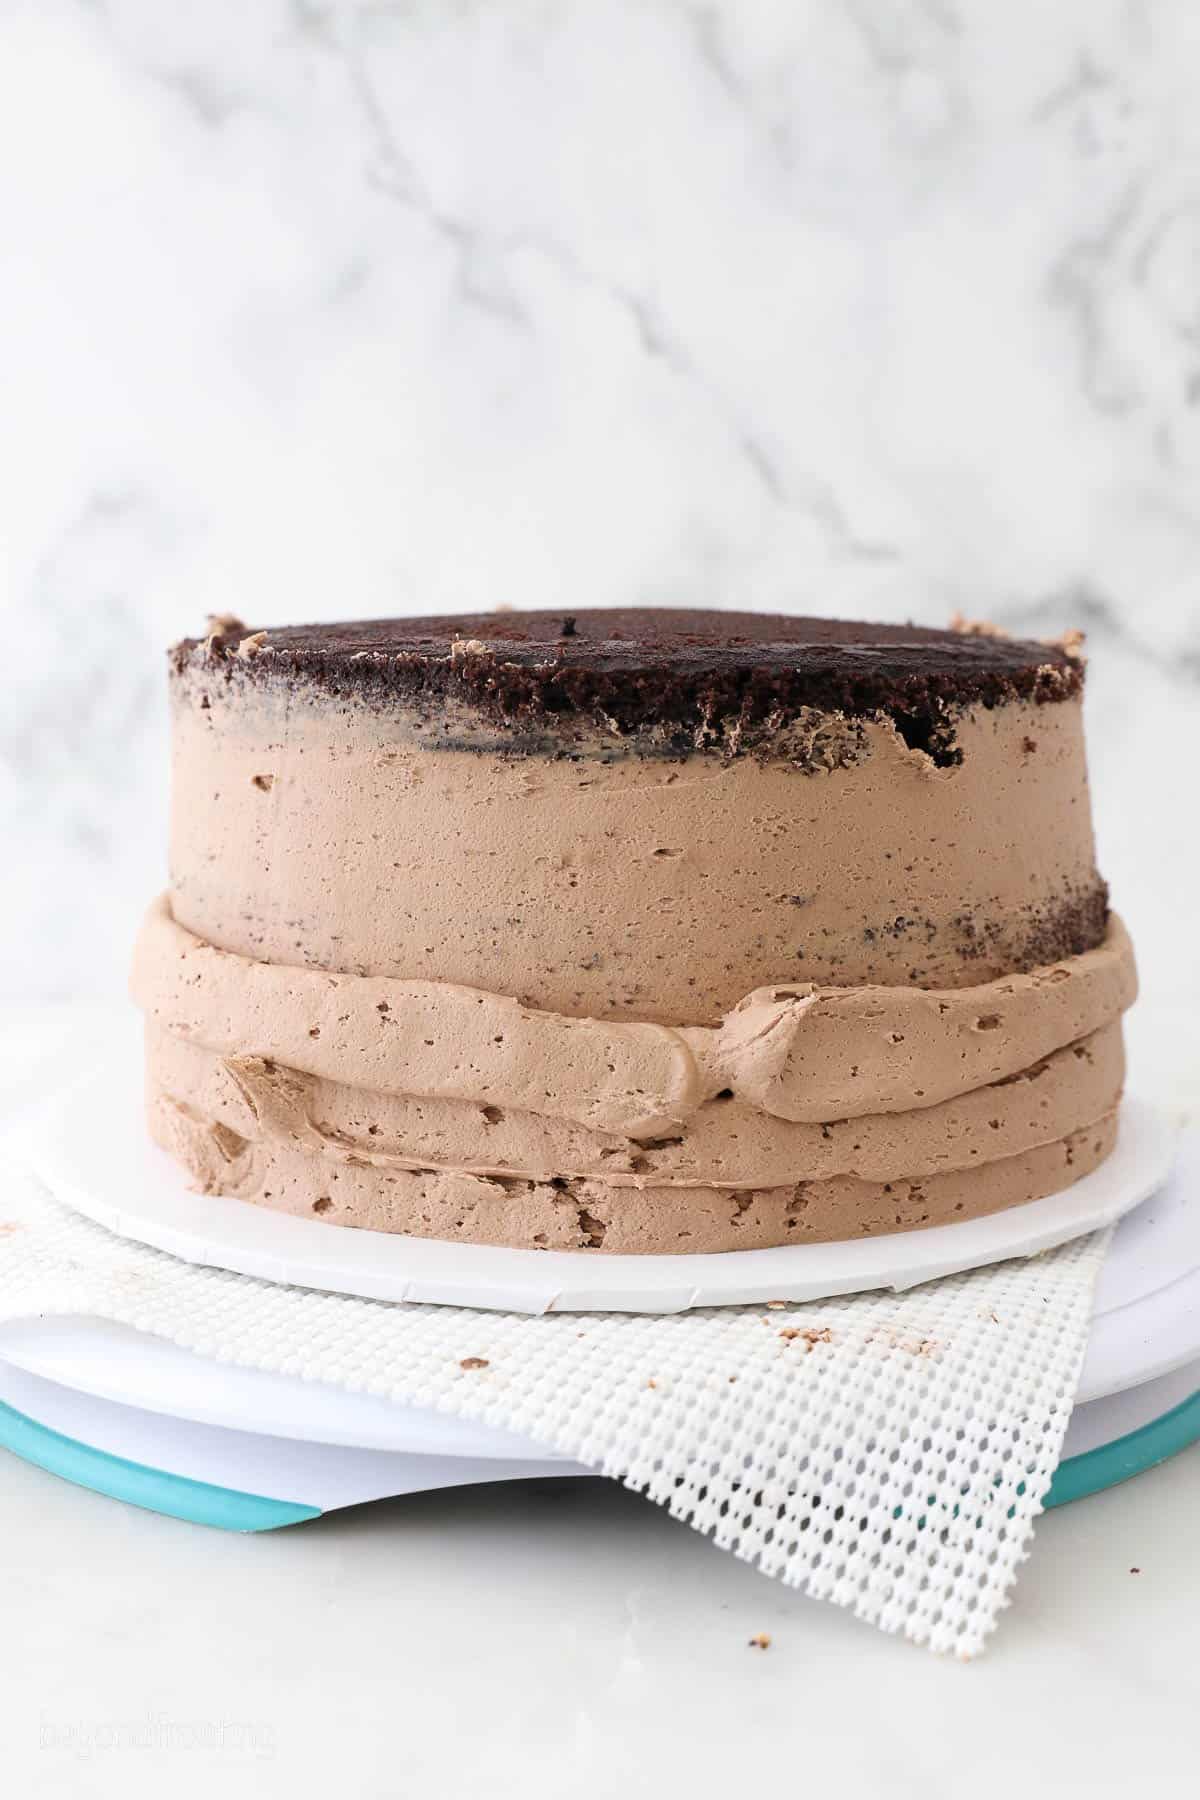 Nutella frosting is piped on outside of chocolate cake.